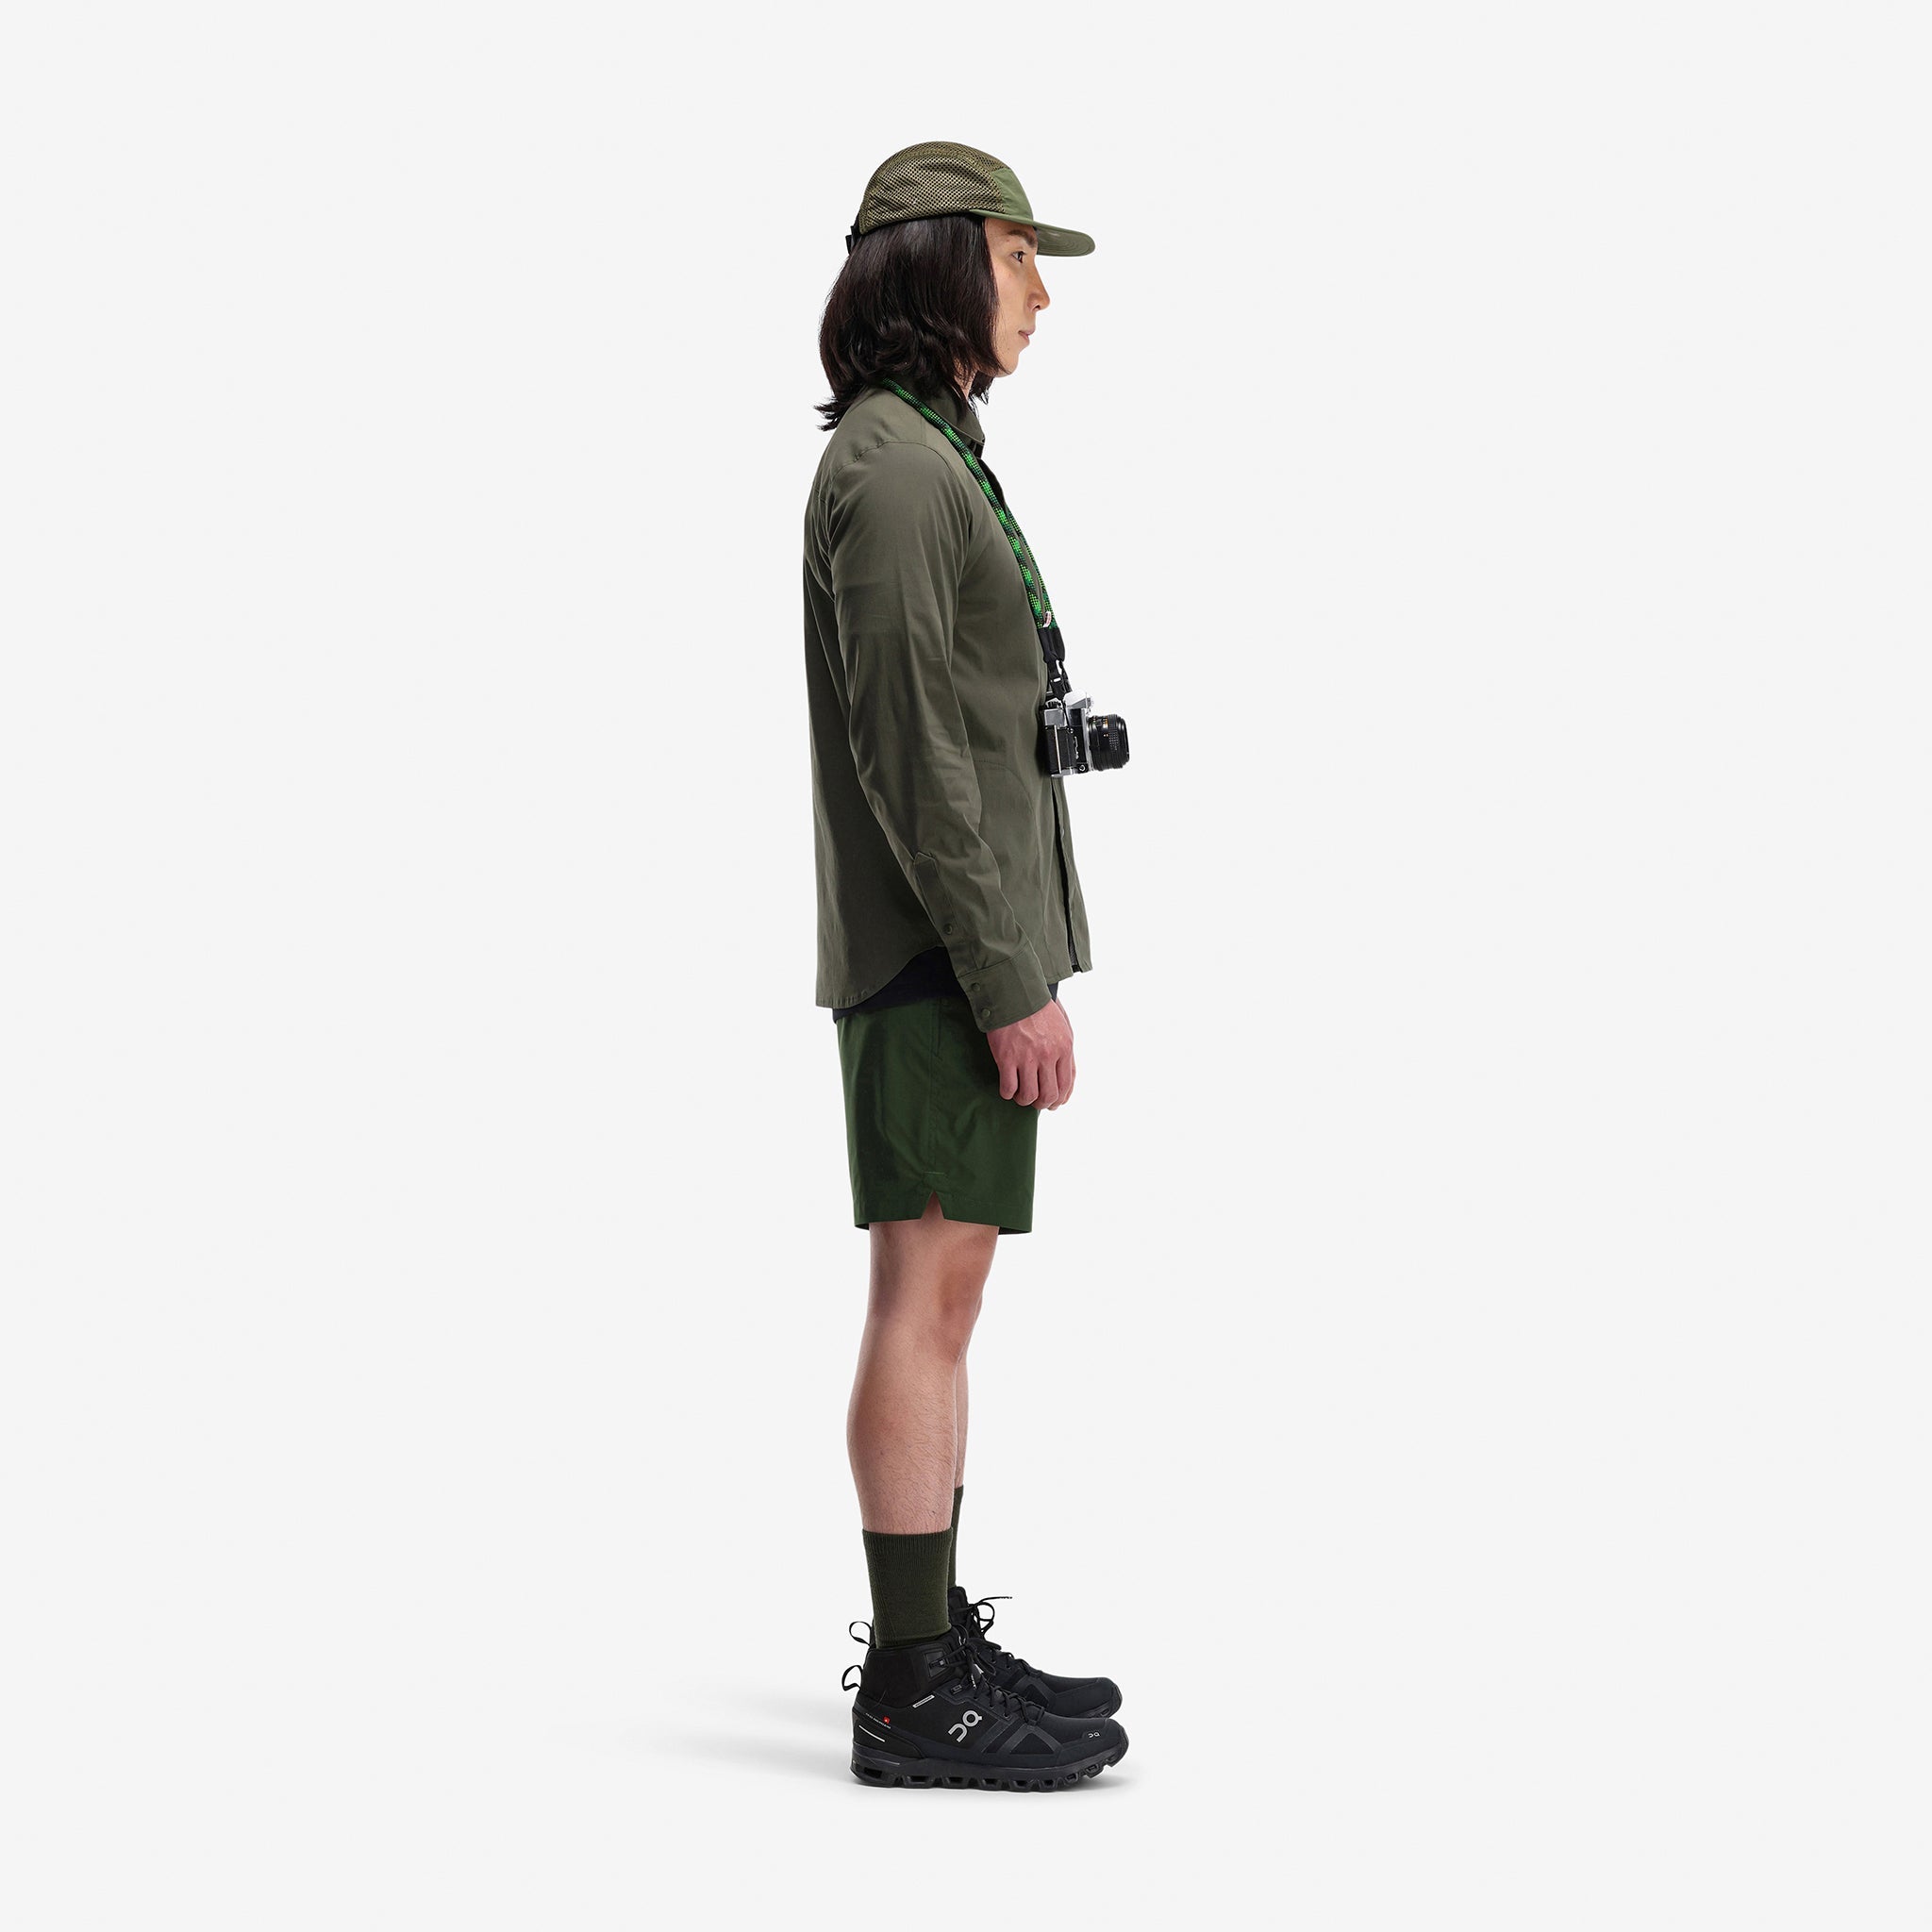 Side model shot of Topo Designs Men's Global lightweight quick dry travel Shorts in "Olive" green.